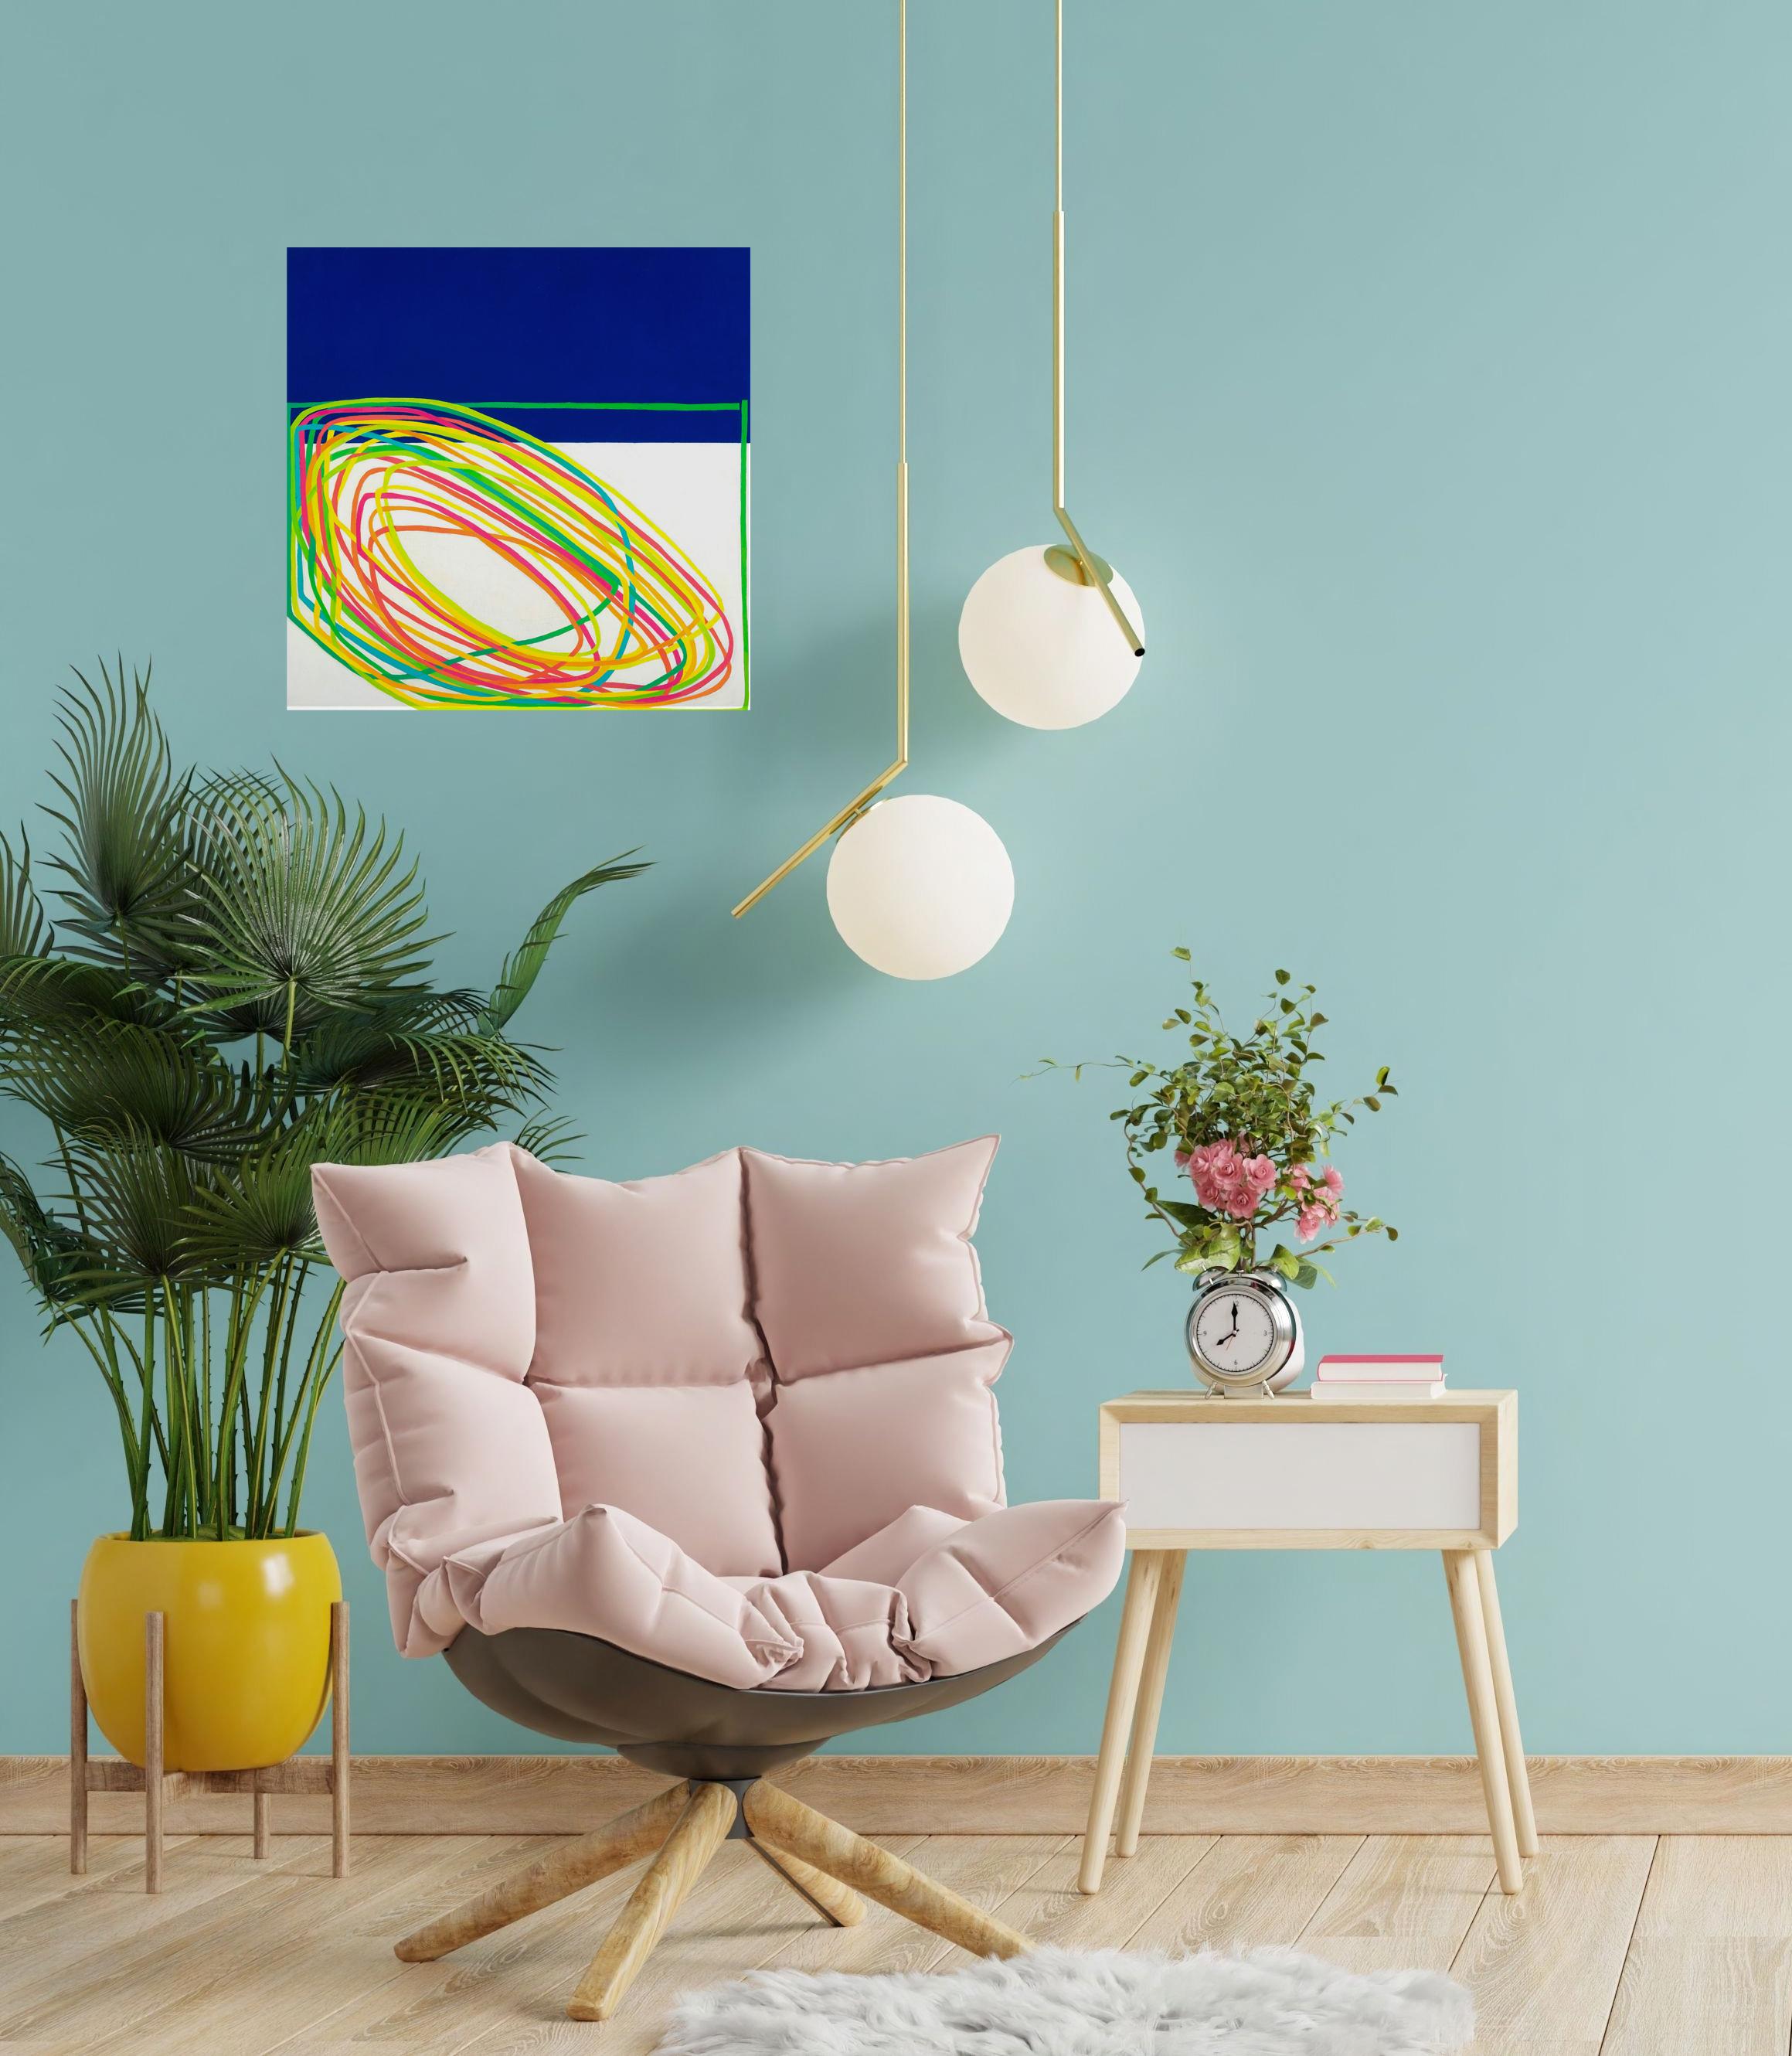 Paula Cahill's linear abstract compositions are often comprised of a single, luminous line that meanders, changes color, and seamlessly connects back to itself. This piece combines Cahill''s signature color-changing line on a white and deep blue